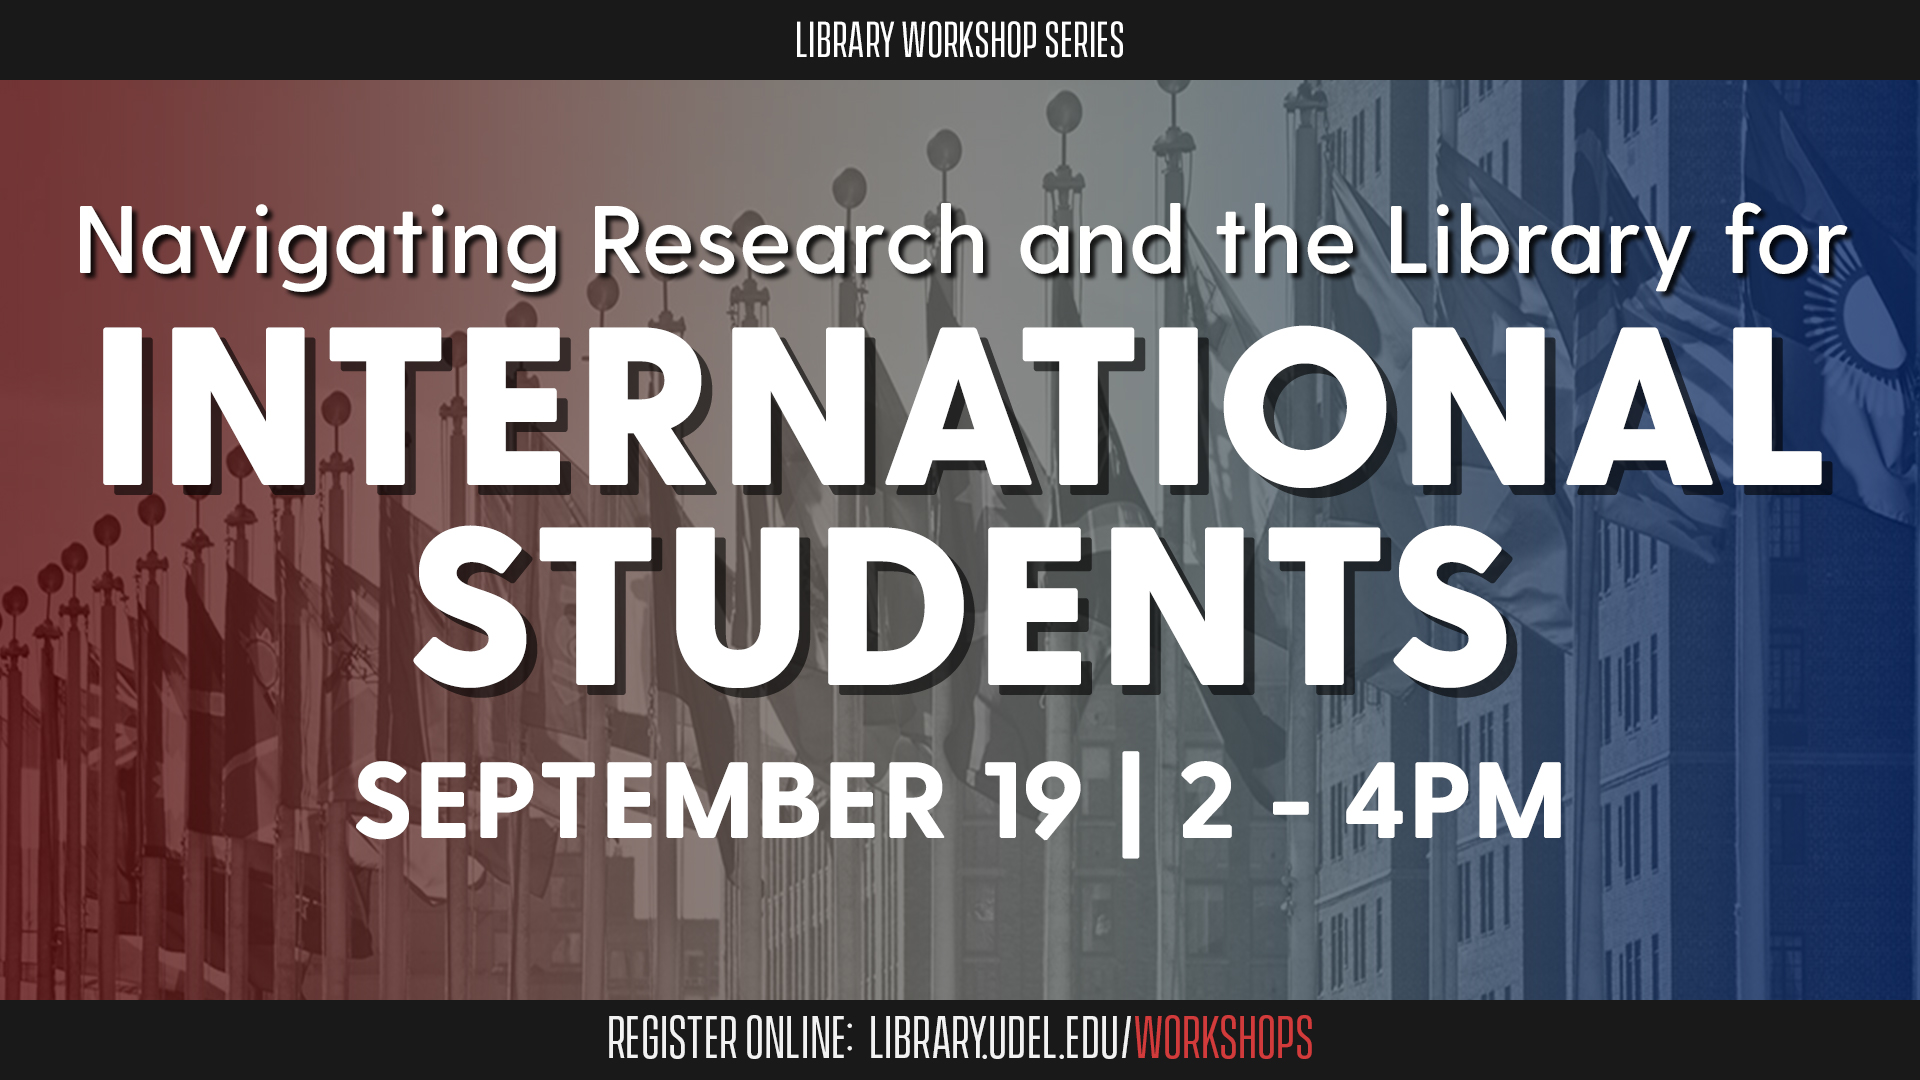 Navigating Research and the Library for International Students